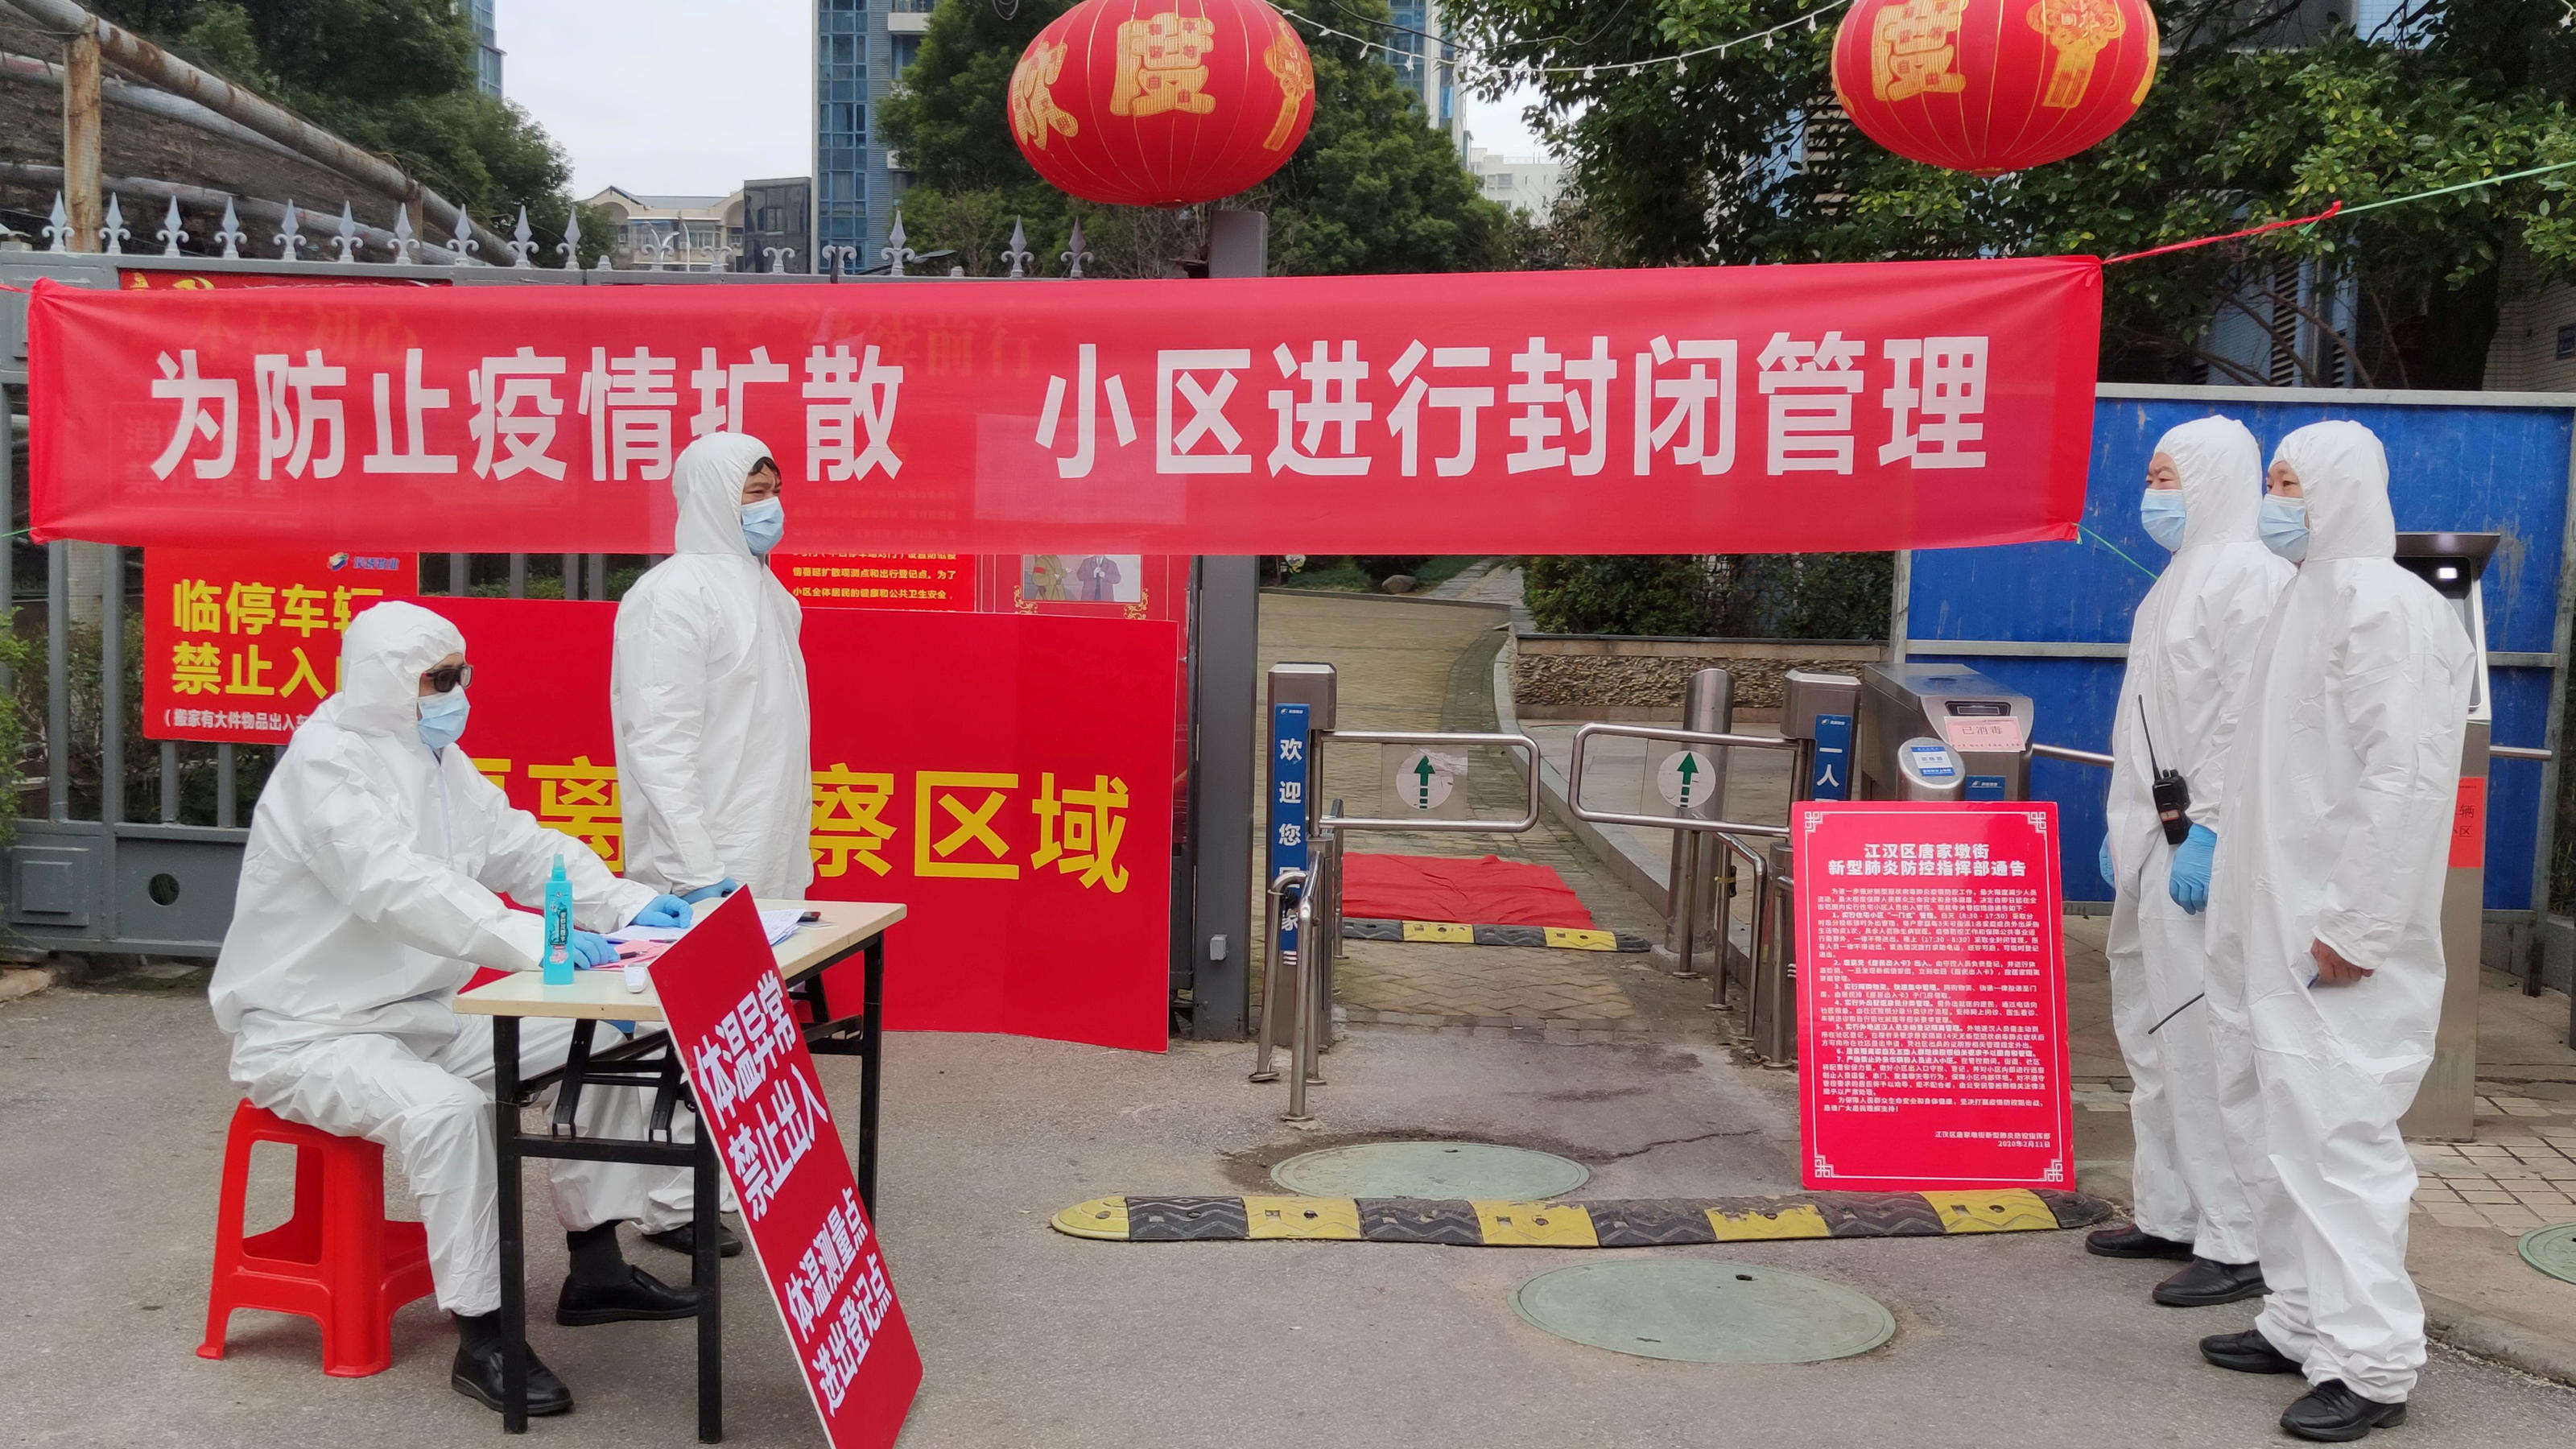 FILE PHOTO: Workers in protective suits are seen at a checkpoint for registration and body temperature measurement, at an entrance to a residential compound in Wuhan, the epicentre of the novel coronavirus outbreak, in Hubei province, China February 